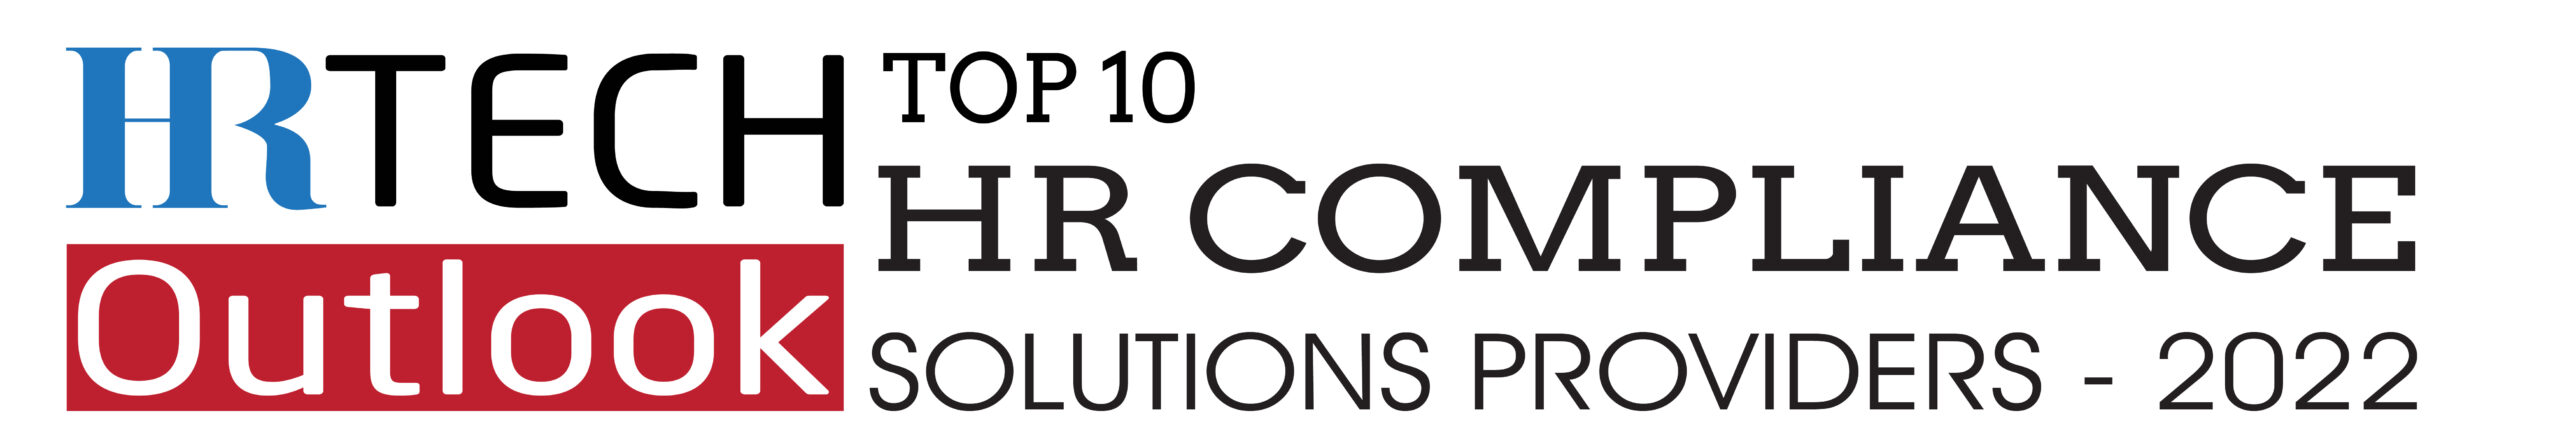 HR Tech Top 10 Compliance Solutions Provider